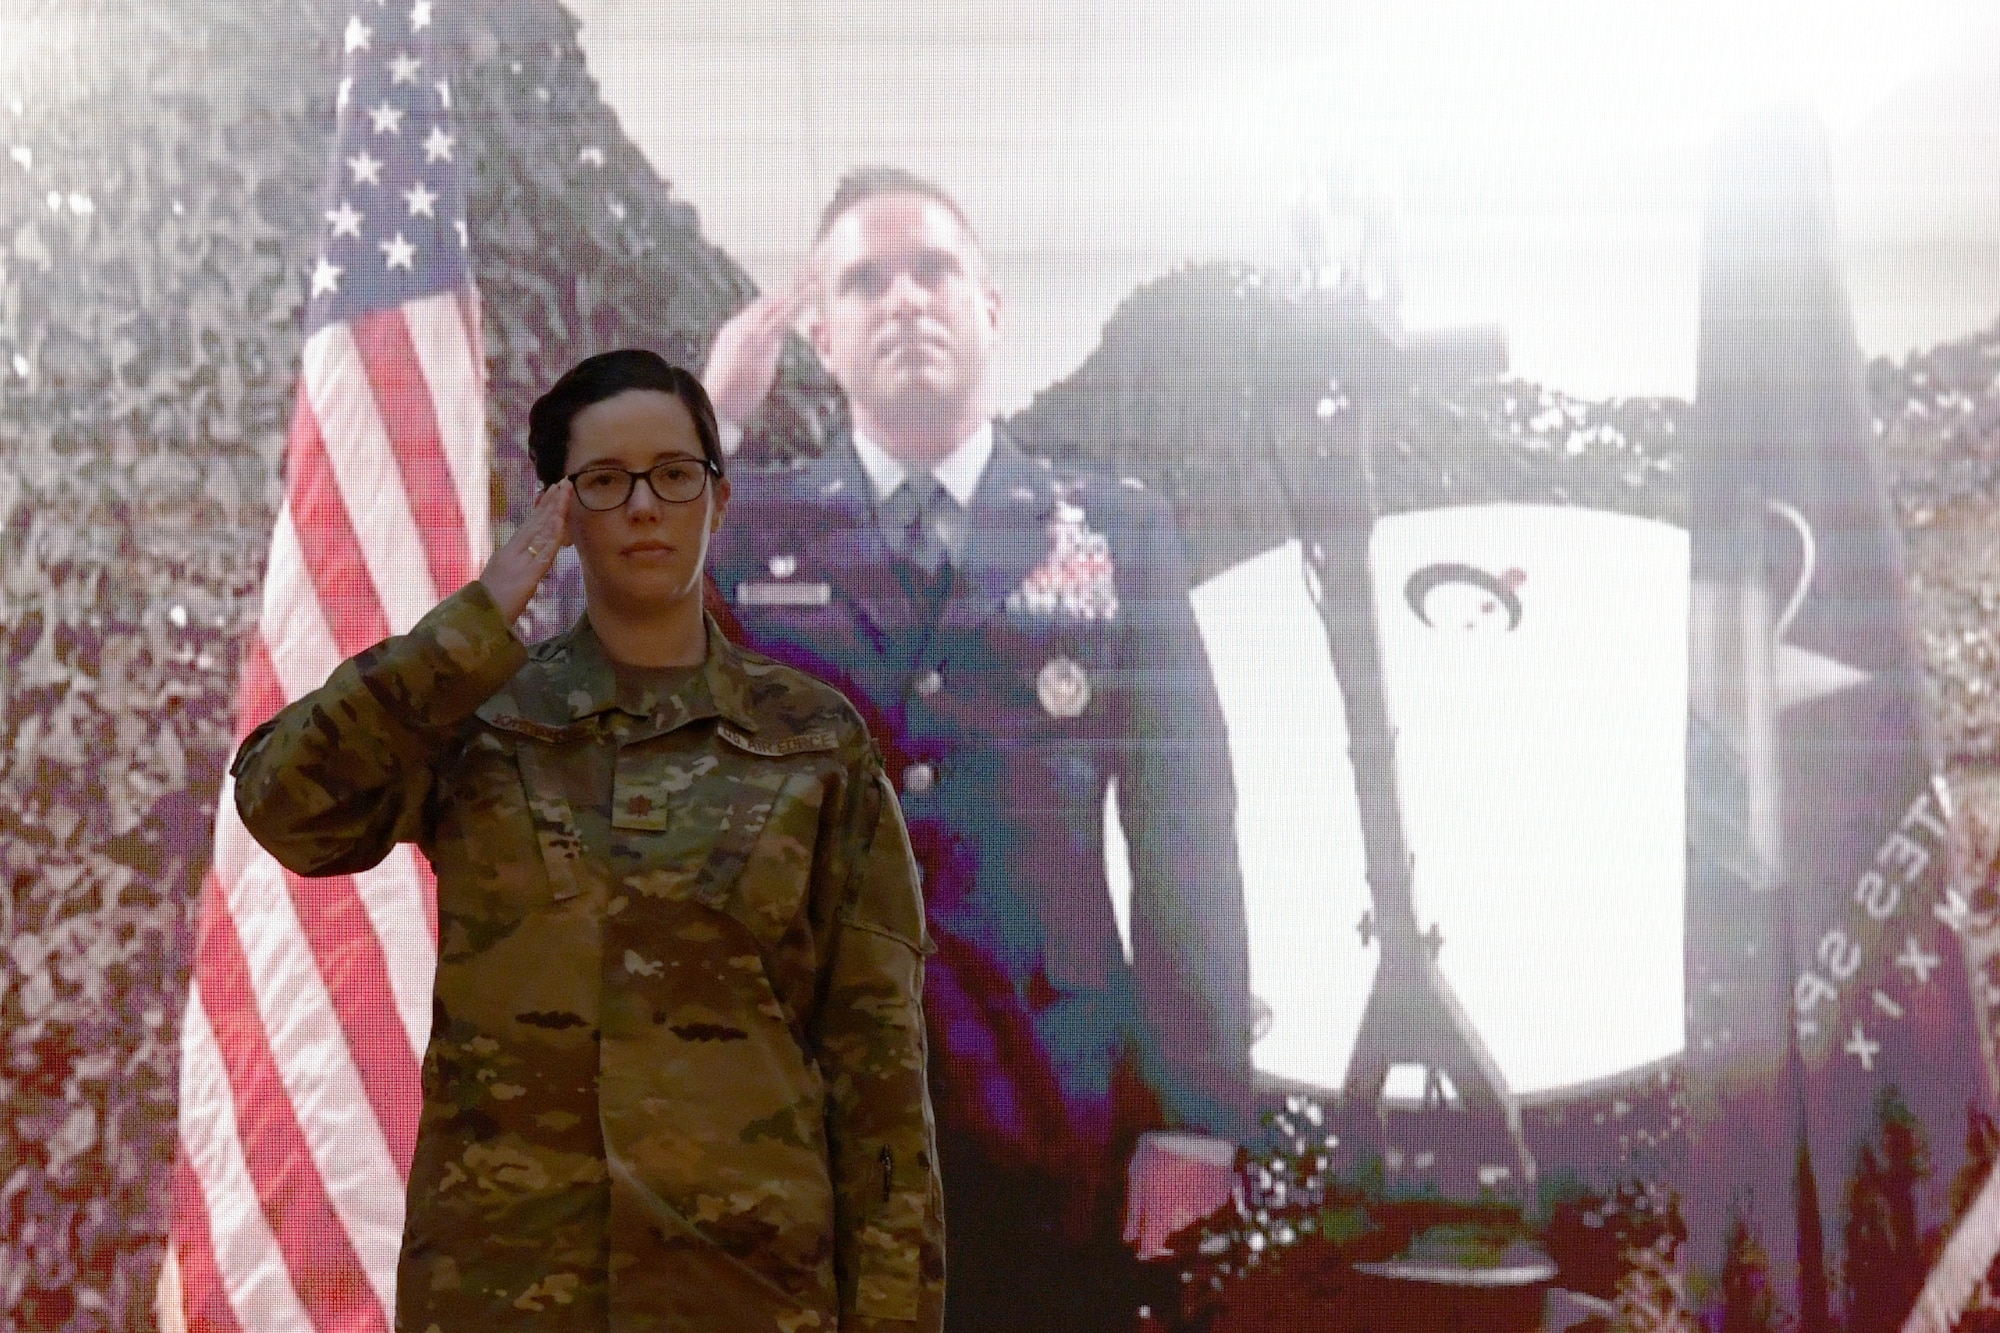 U.S. Space Force Maj. Rachel A. Johnston assumes command of Detachment 2, 73rd Intelligence, Surveillance and Reconnaissance Squadron, during a transition ceremony at Osan Air Base, Republic of Korea, Nov. 5, 2020. The 73rd ISRS is one of the first squadrons to support space operations and acquisition. (U.S. Air Force photo by Senior Airman Noah Sudolcan)